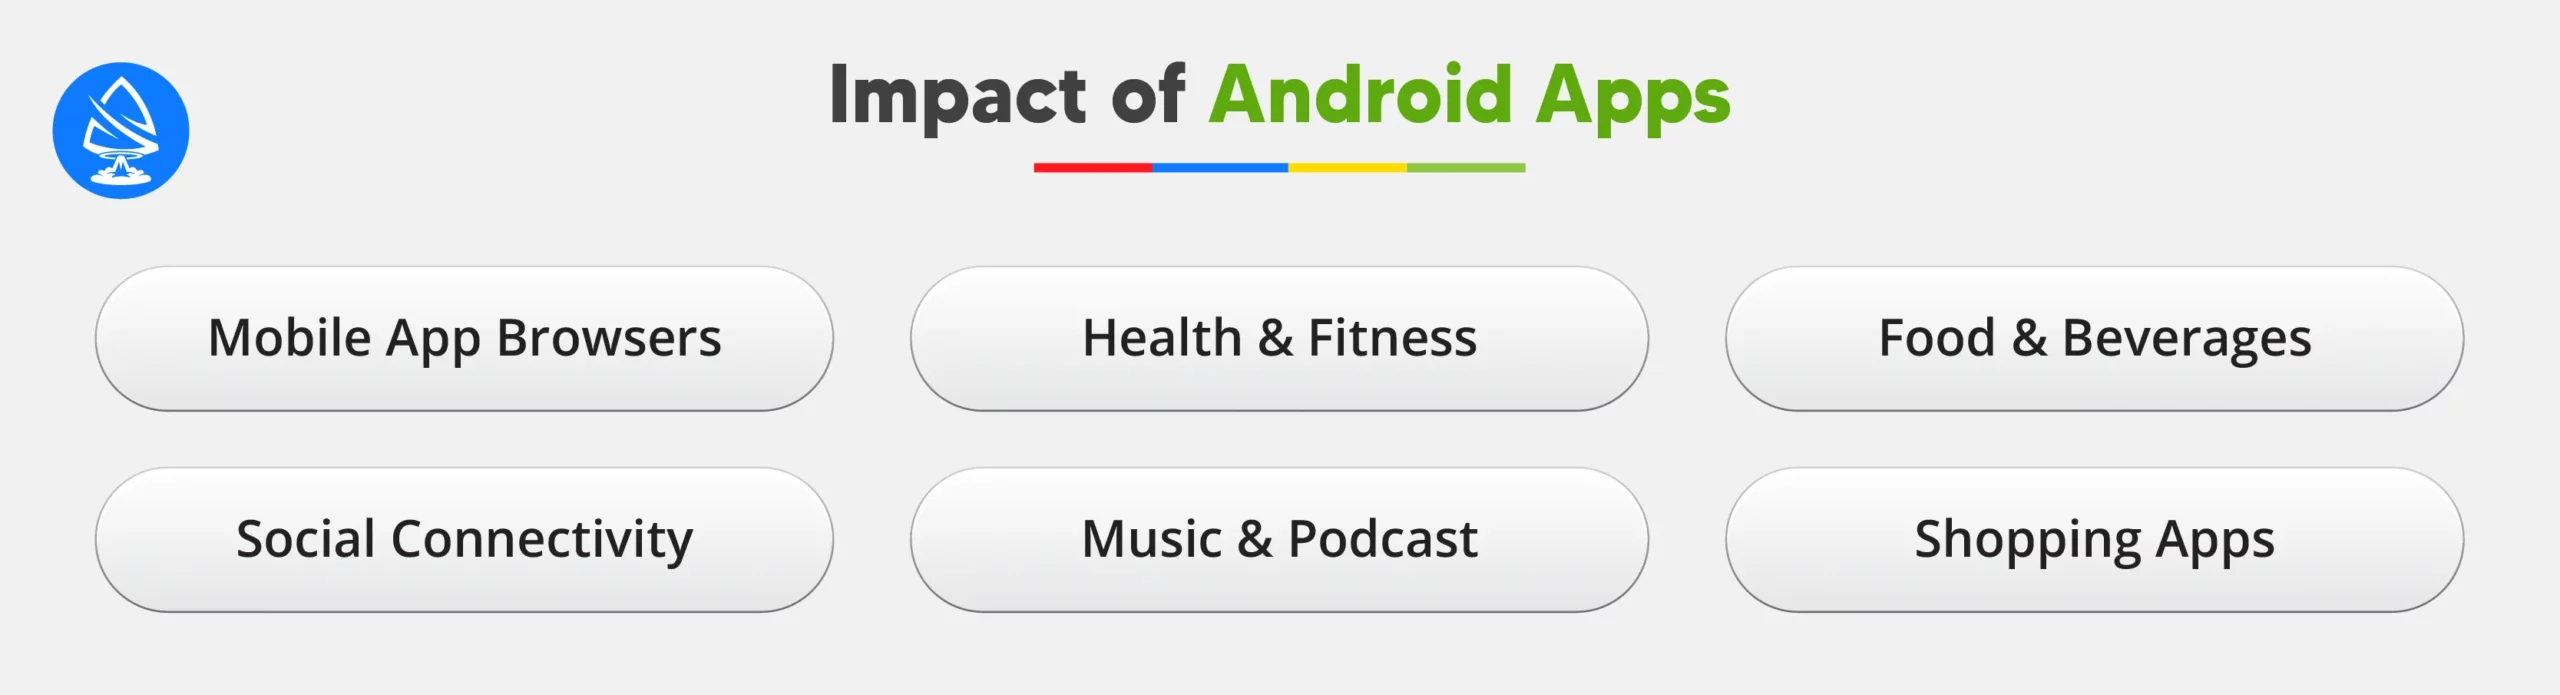 Impact of Android Apps